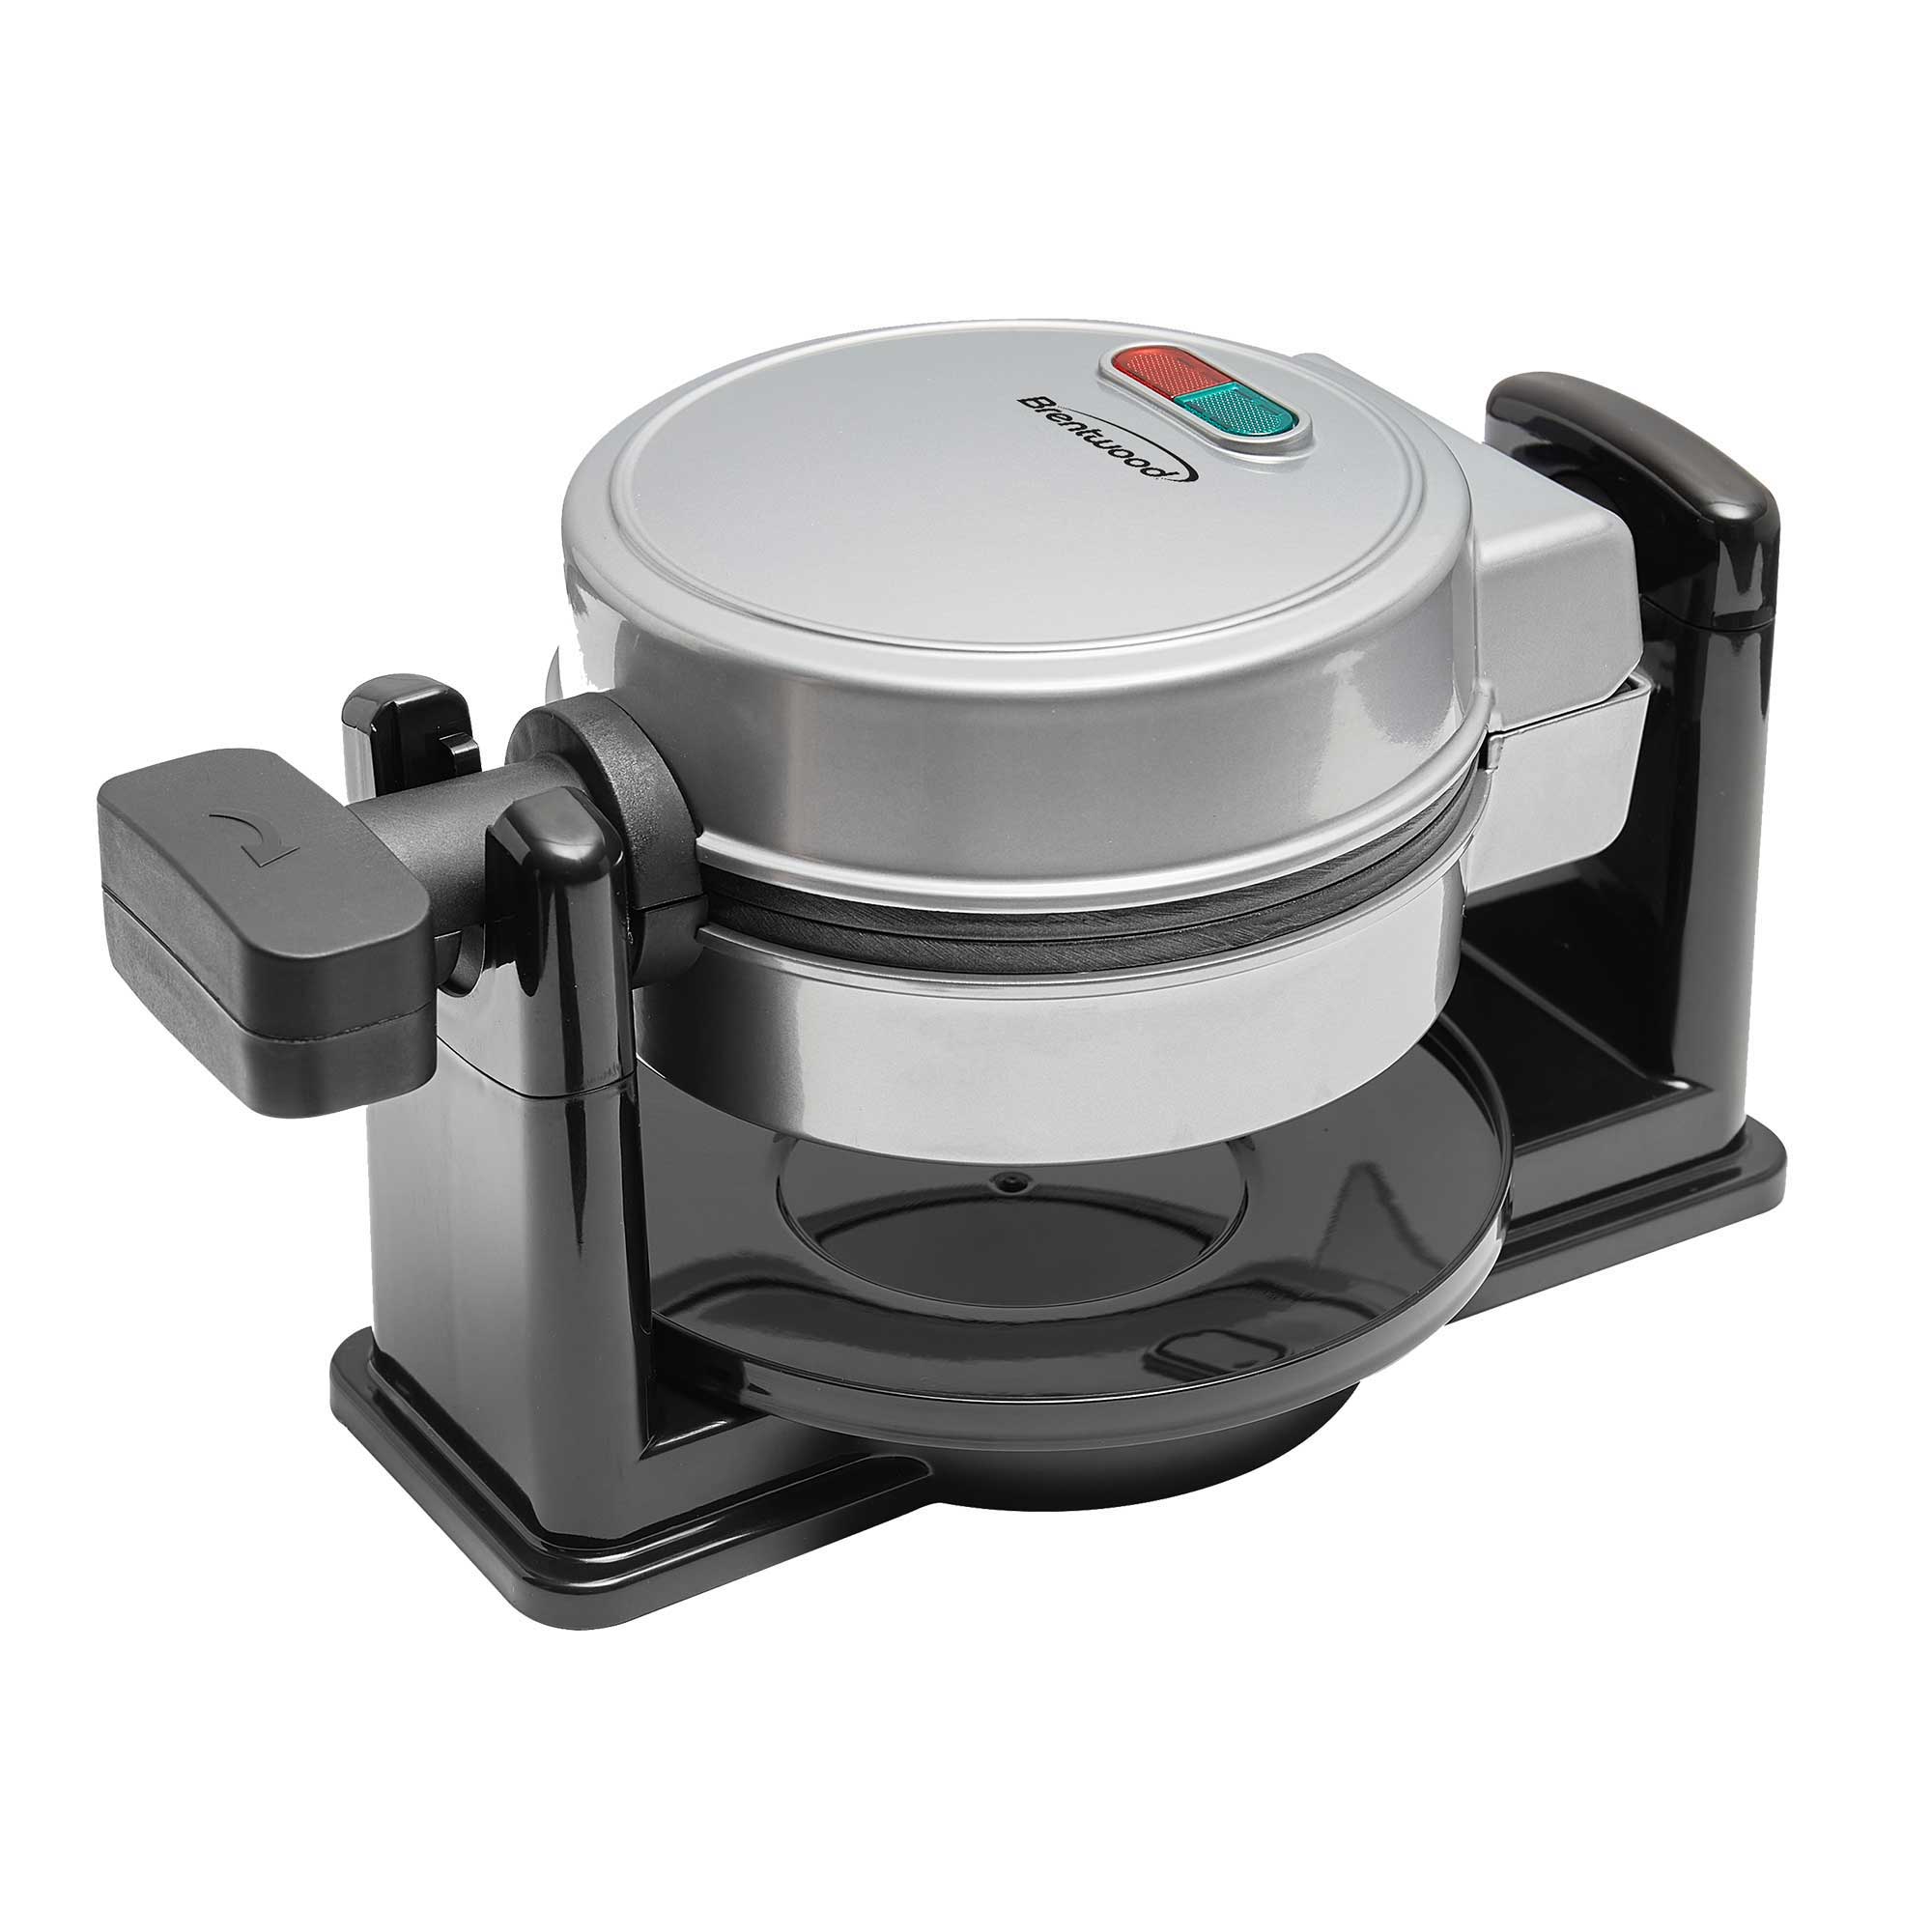 Brentwood Select Non-Stick Electric Food Waffle Maker, Animal Shape at  Tractor Supply Co.